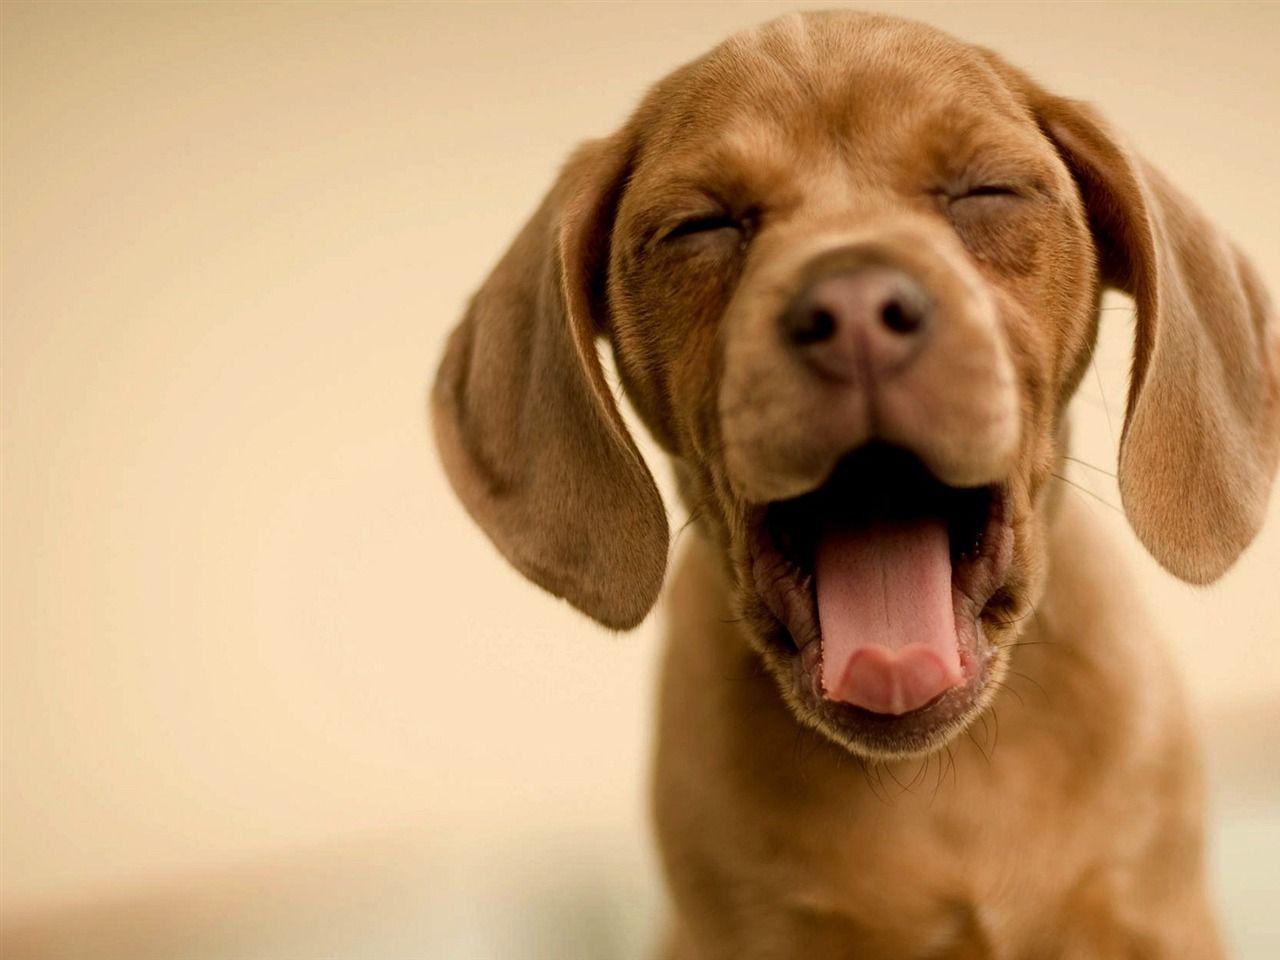  Funny Dog Wallpaper Android iPhone Desktop HD